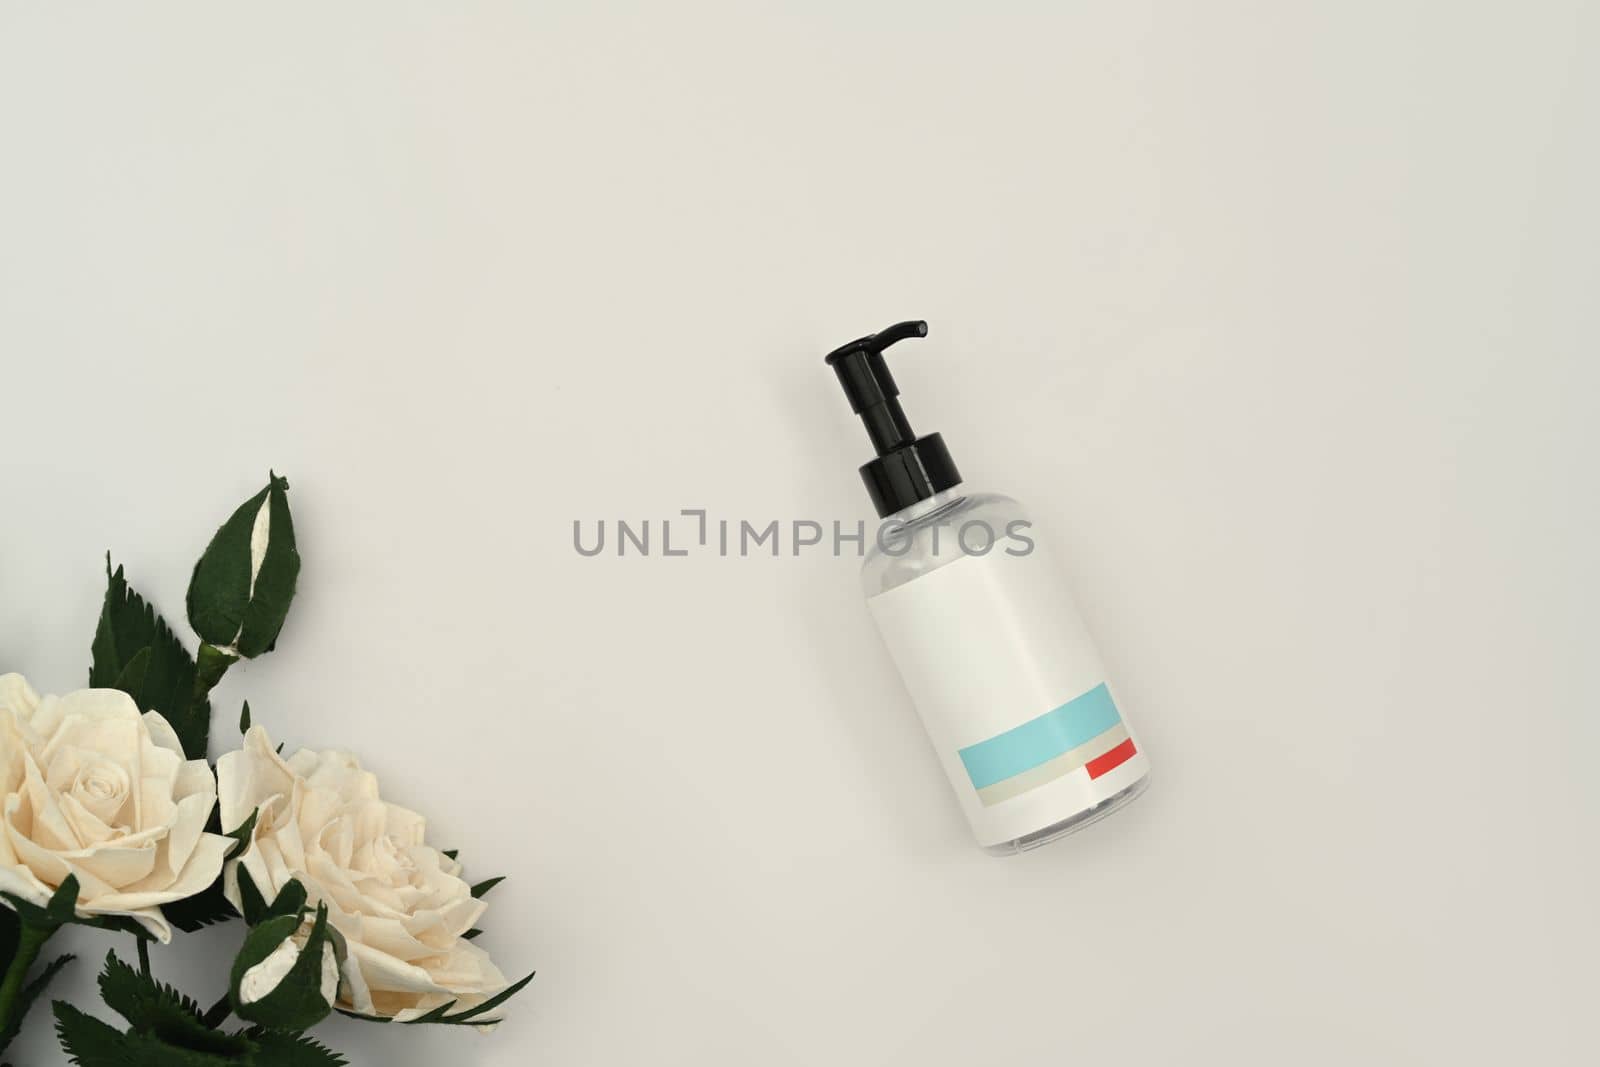 Shampoo or soap plastic bottle dispenser with white rose on white background. Natural skincare, beauty product design concept by prathanchorruangsak